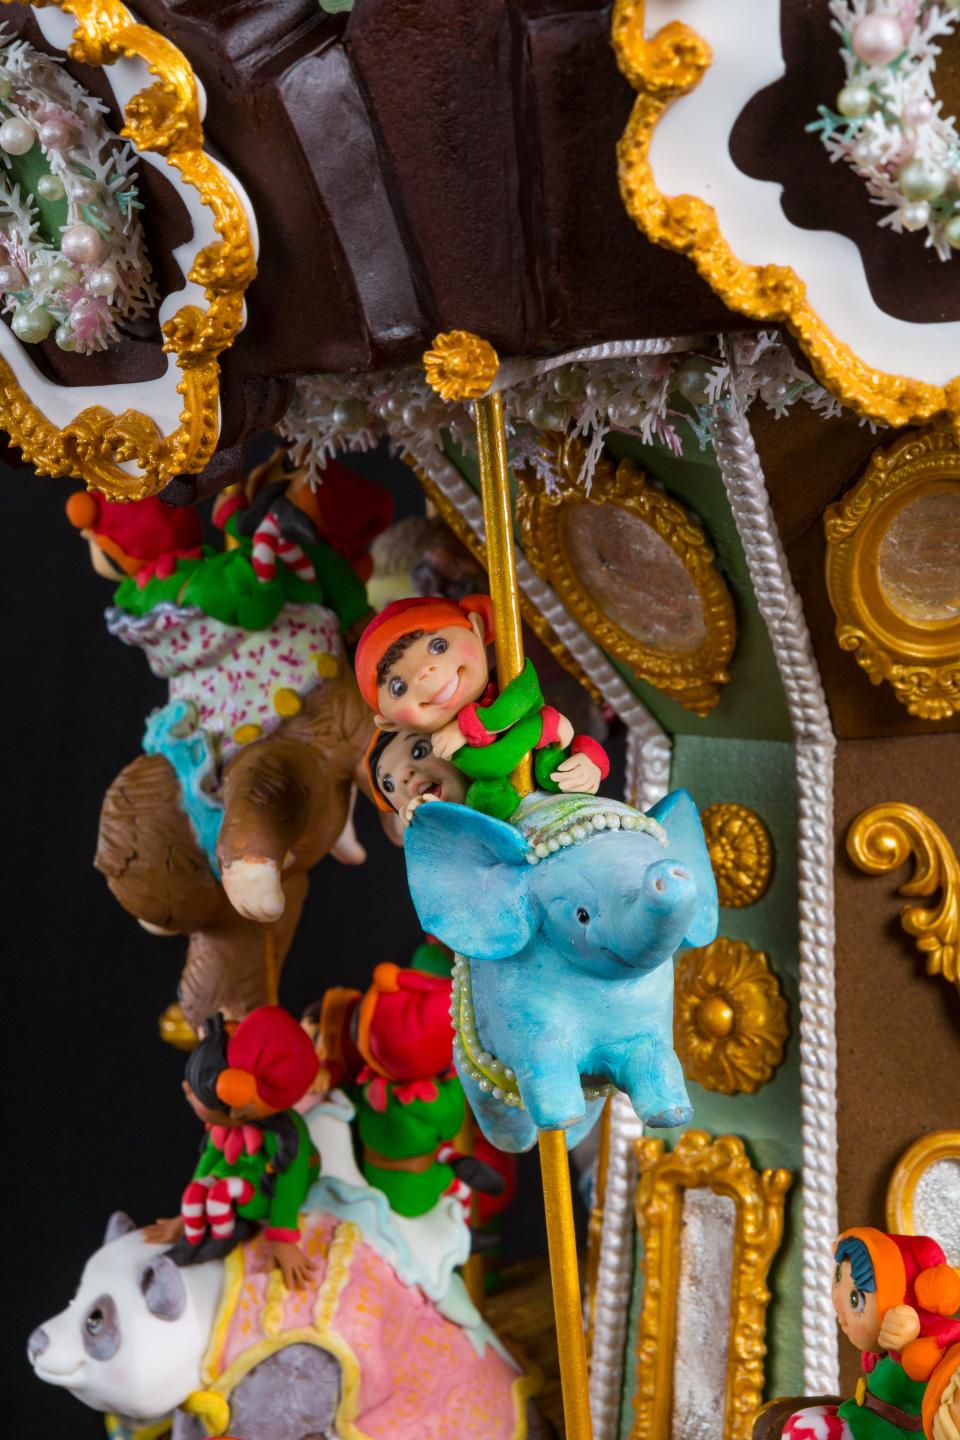 At the National Gingerbread House Competition, all entries must be 100% edible. The 2021 grand prize winner, Merry Mischief Bakers, created a carousel of handcrafted holiday friends.